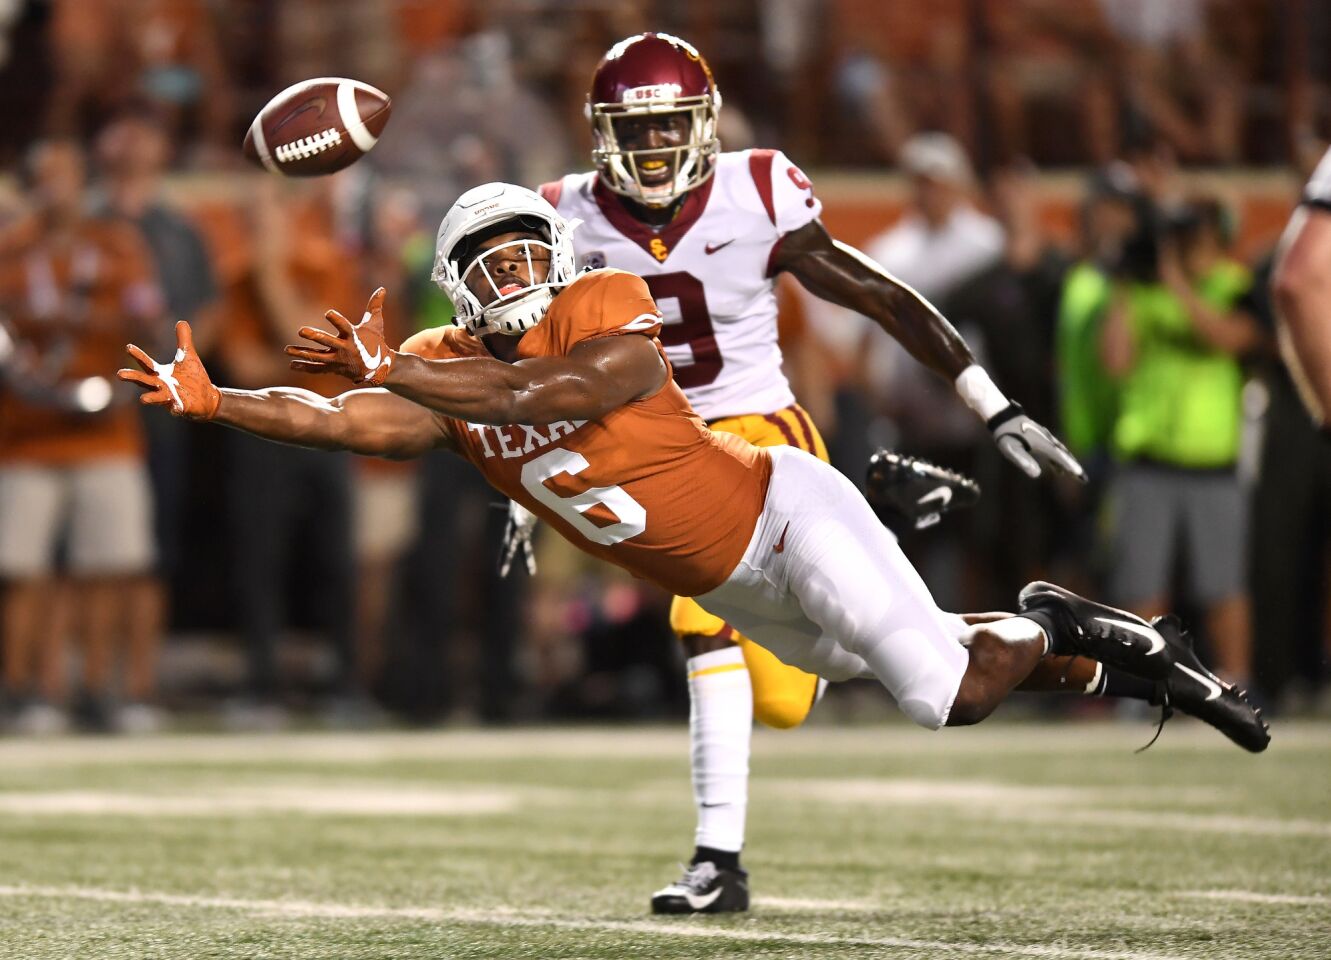 Texas receiver Devin Duvernay dives but can't make the catch as USC cornerback Greg Johnson defends in the second quarter at Royal-Texas Memorial Stadium.